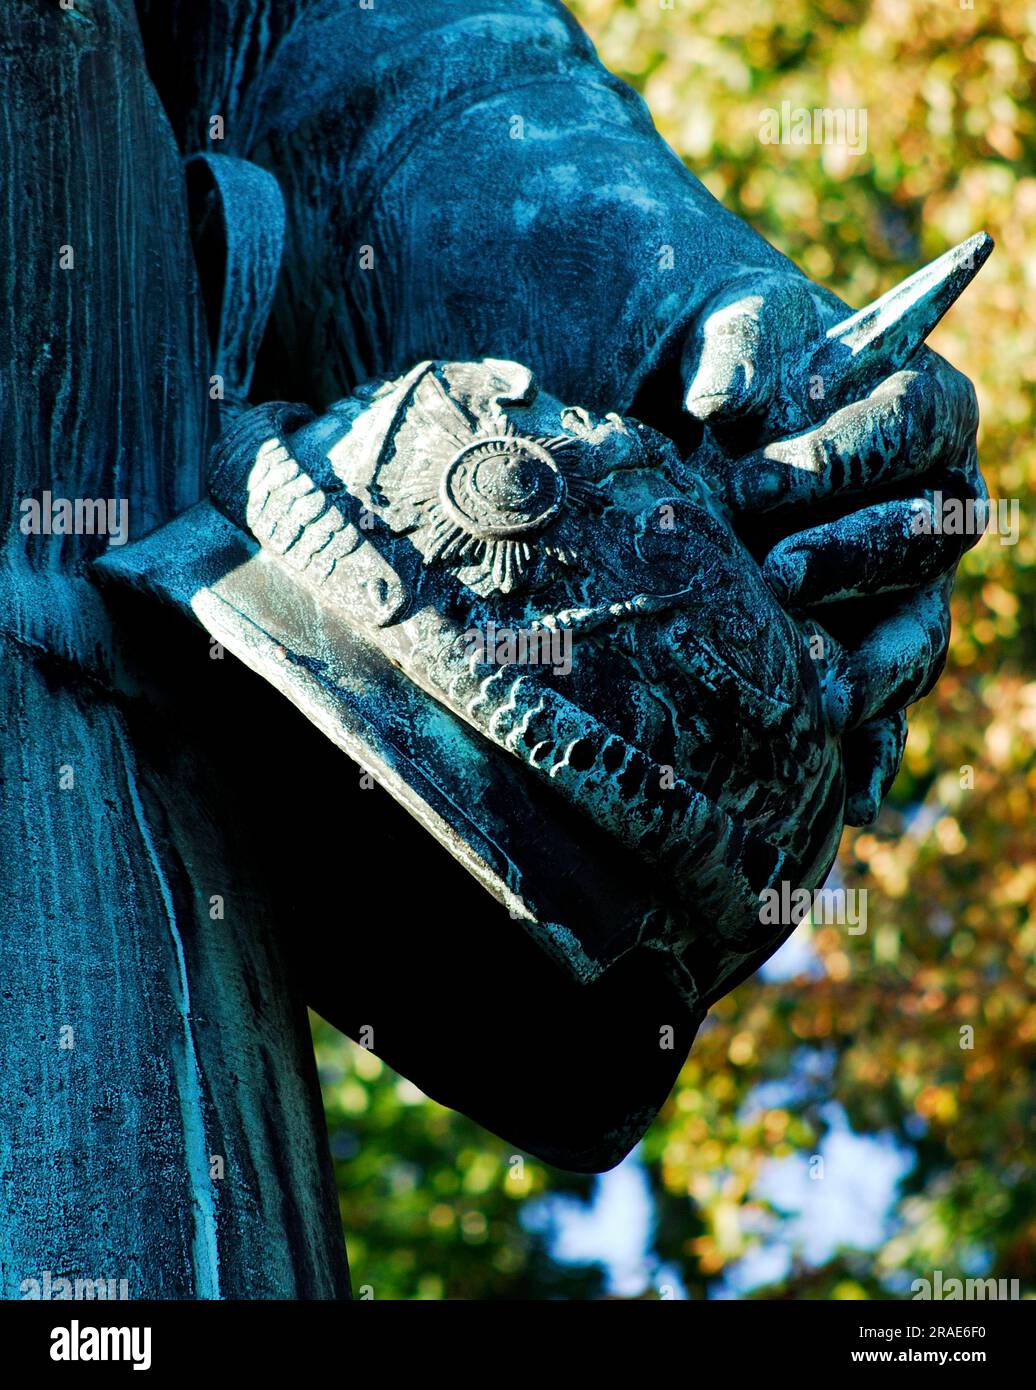 Pickelhaube, Monument by Prussian General Albrecht Theodor Emil Graf von Roon, Berlin, Germany Stock Photo